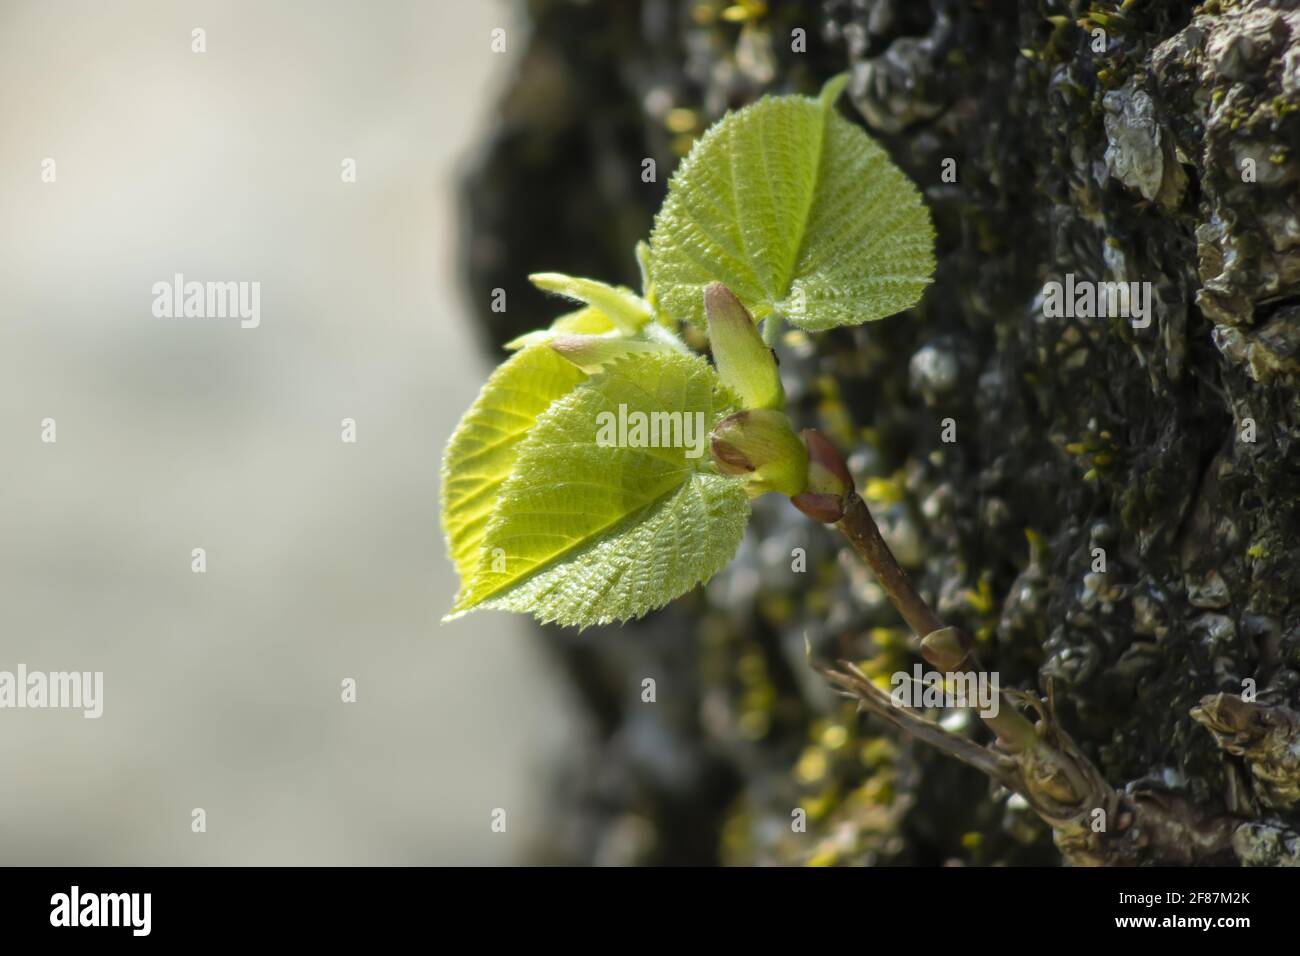 Small Linden Leaves Emerging From Trunk. On Small Twig Together With Buds. Macro Photo. Stock Photo